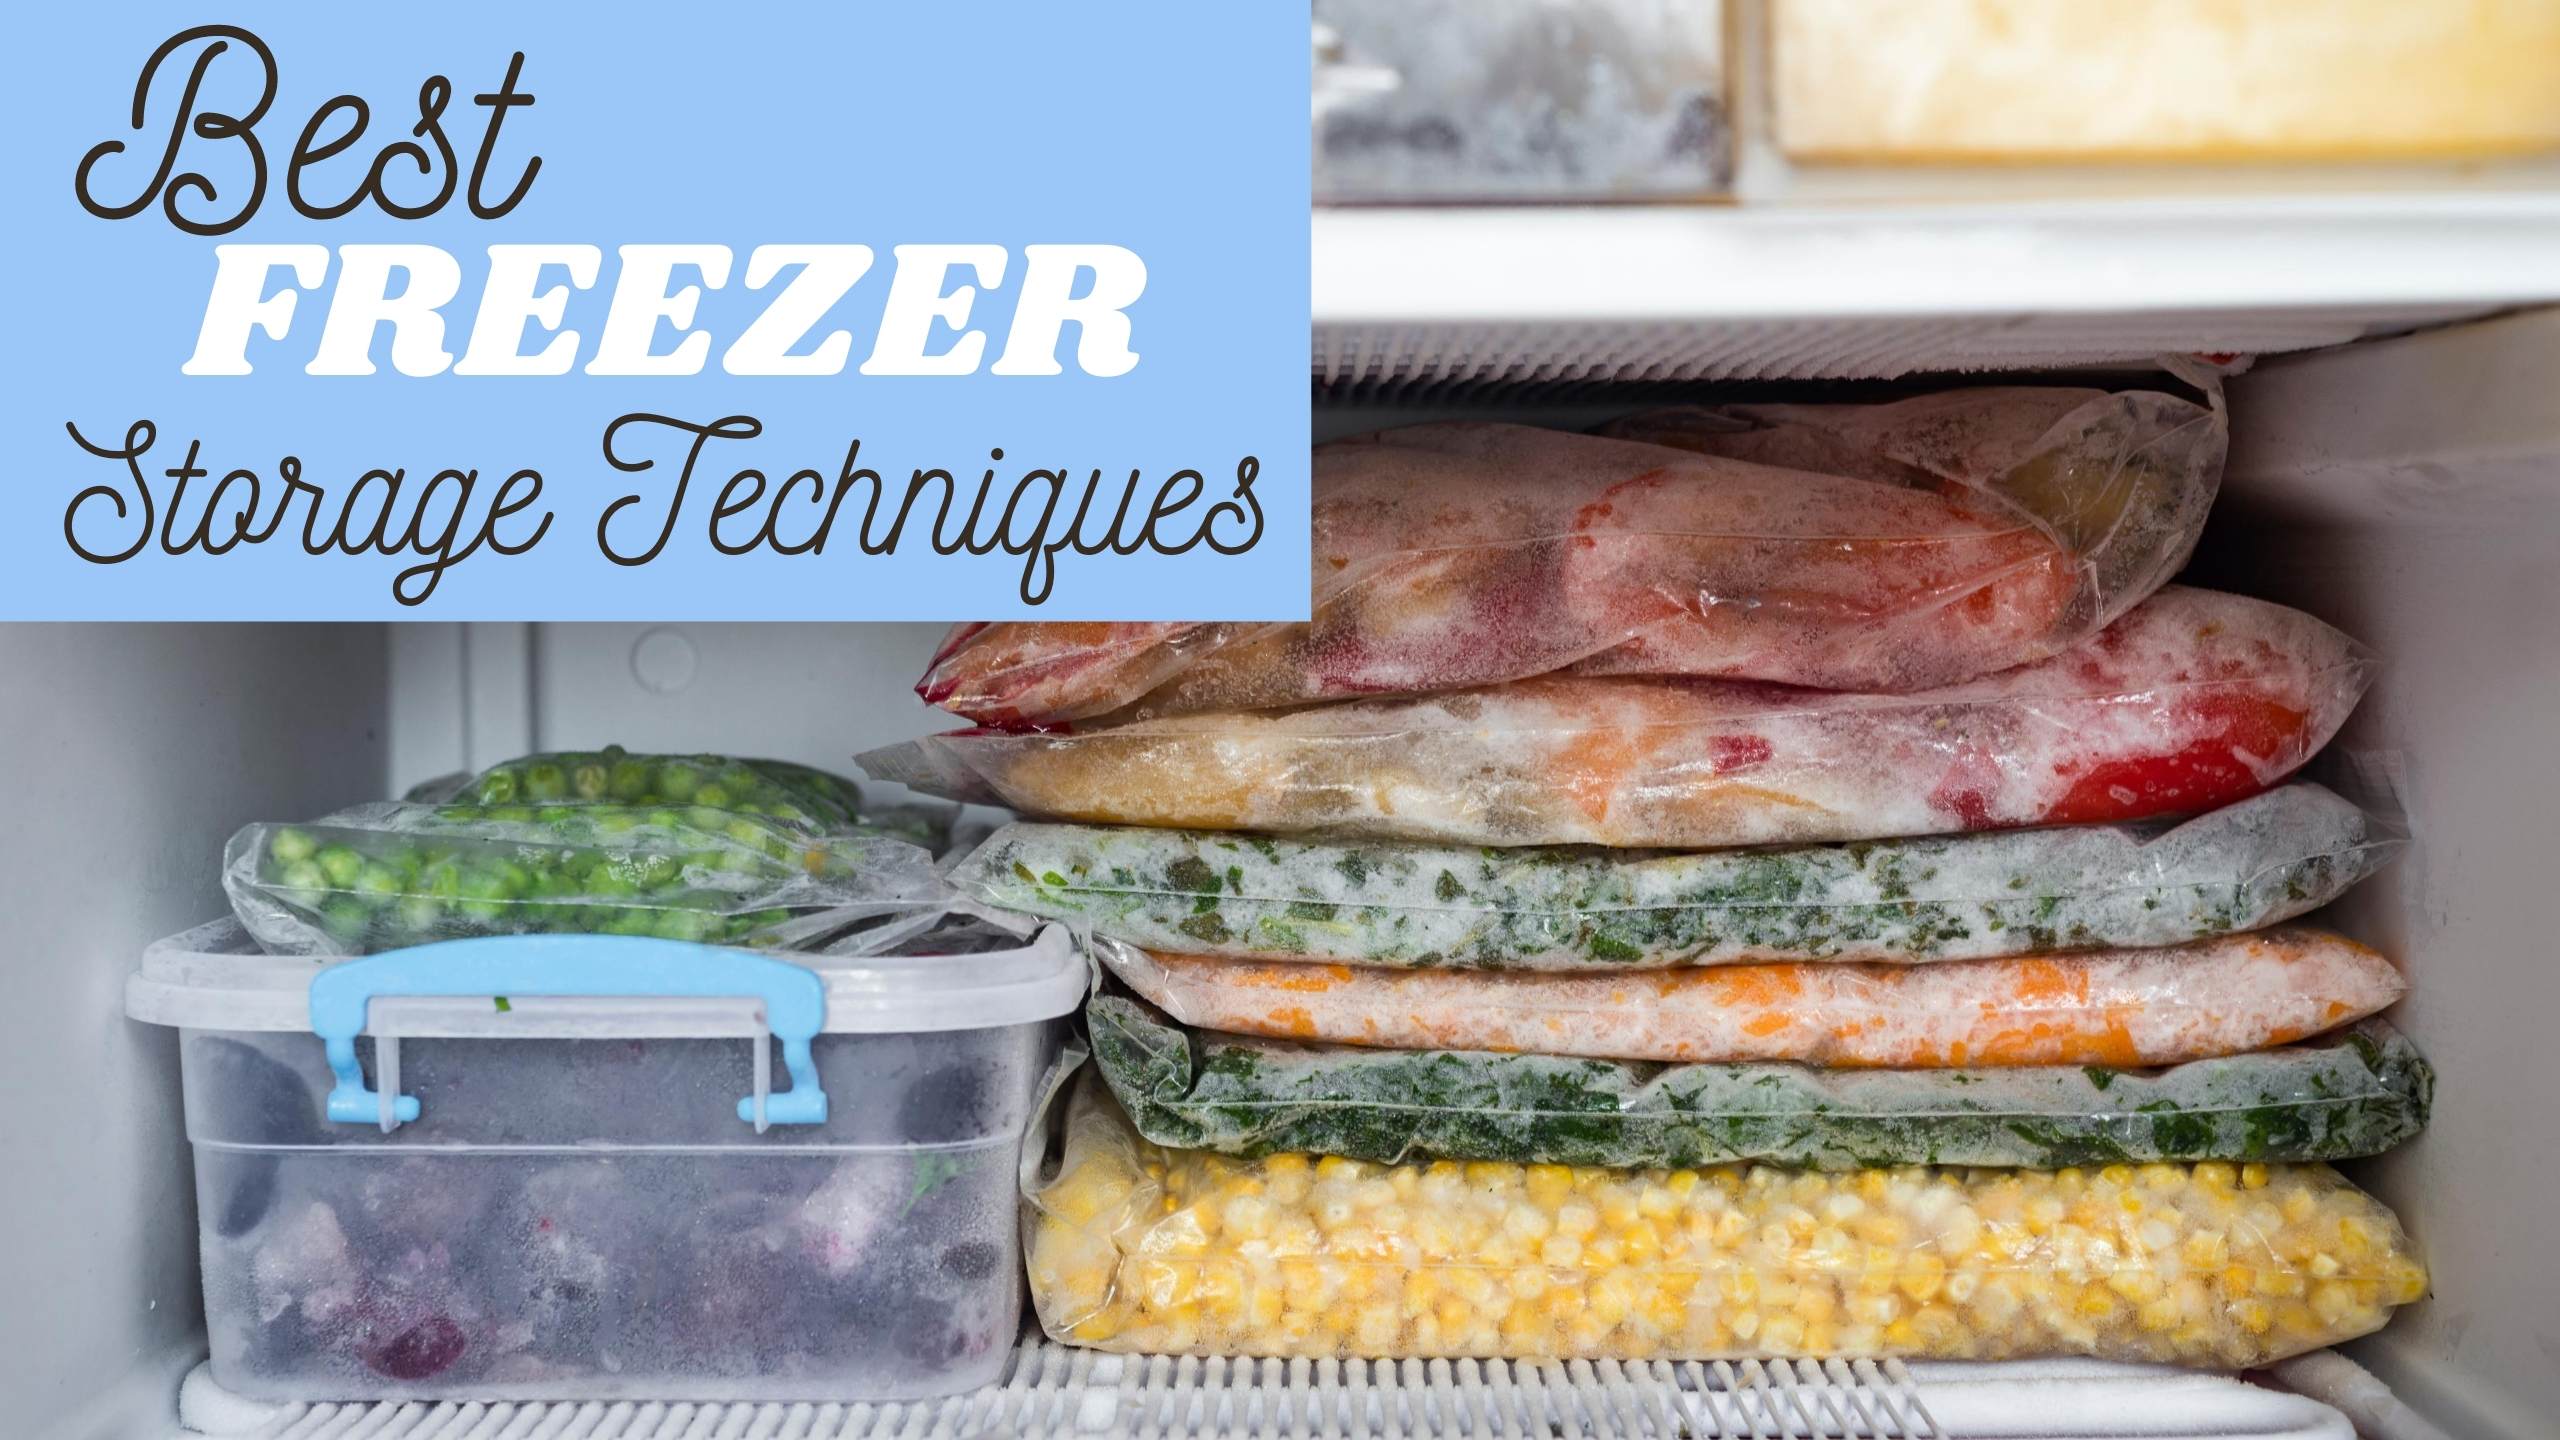 Freezing 101: How to Make the Most of Your Freezer